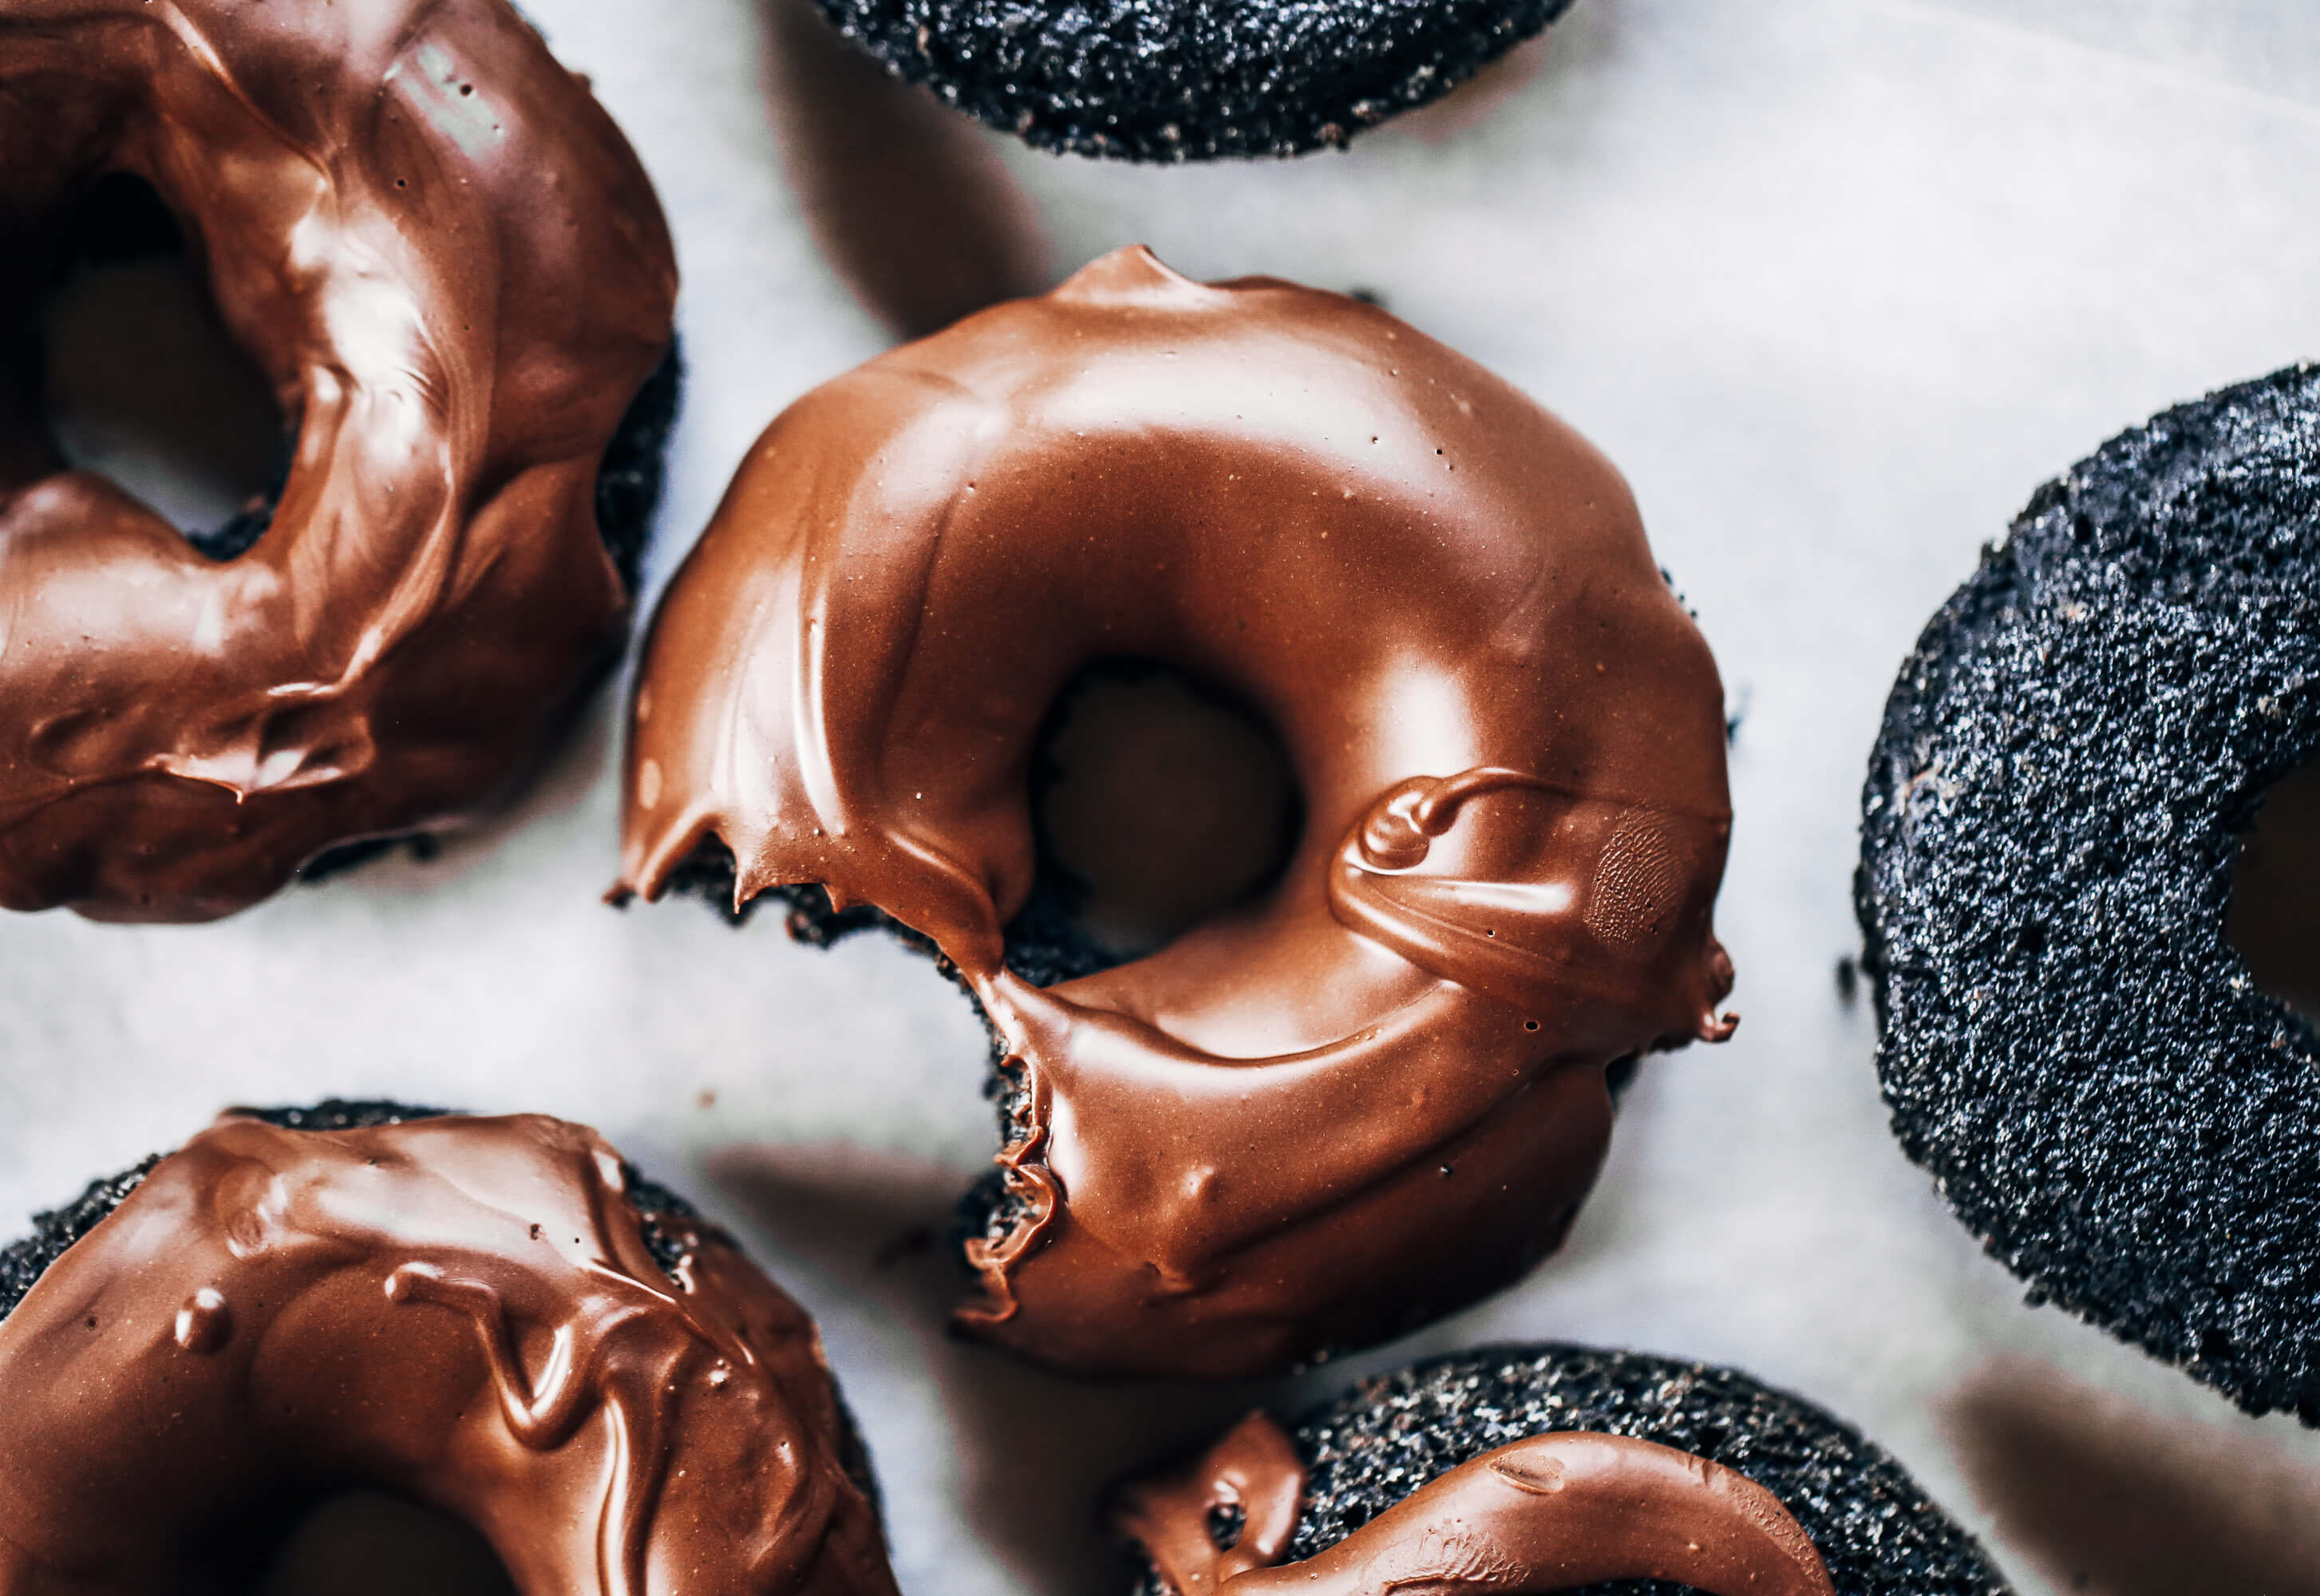 Healthy paleo chocolate glazed donuts made with sweet potato instead of flour! Easy baked donut recipe perfect for celebrations! Baked gluten free chocolate donuts. #paleo #donuts #dessert #chocolate